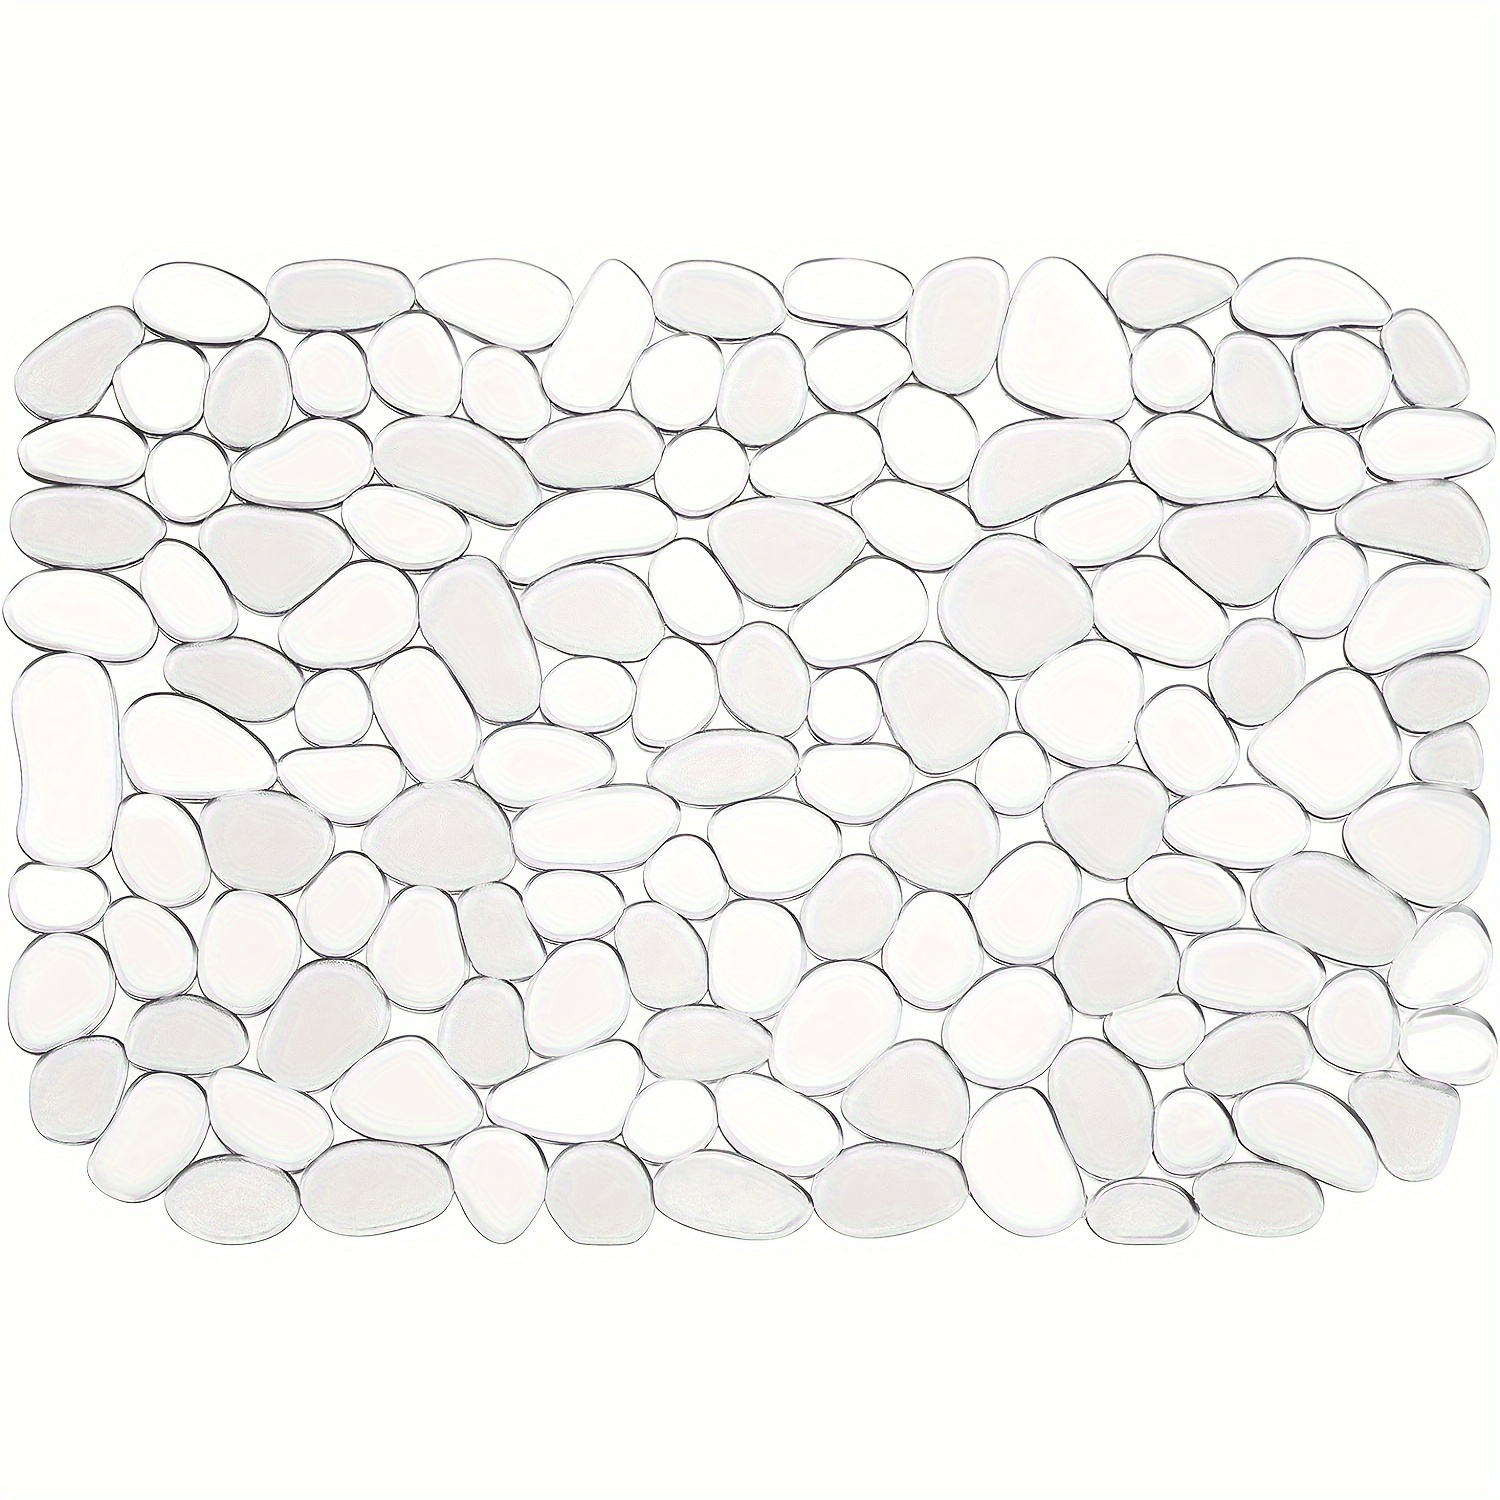 

Pebble Design Sink Mat - Anti-slip, Scratch-resistant Pvc, Ideal For Kitchen & Bathroom, 15.8x11.8 Inches